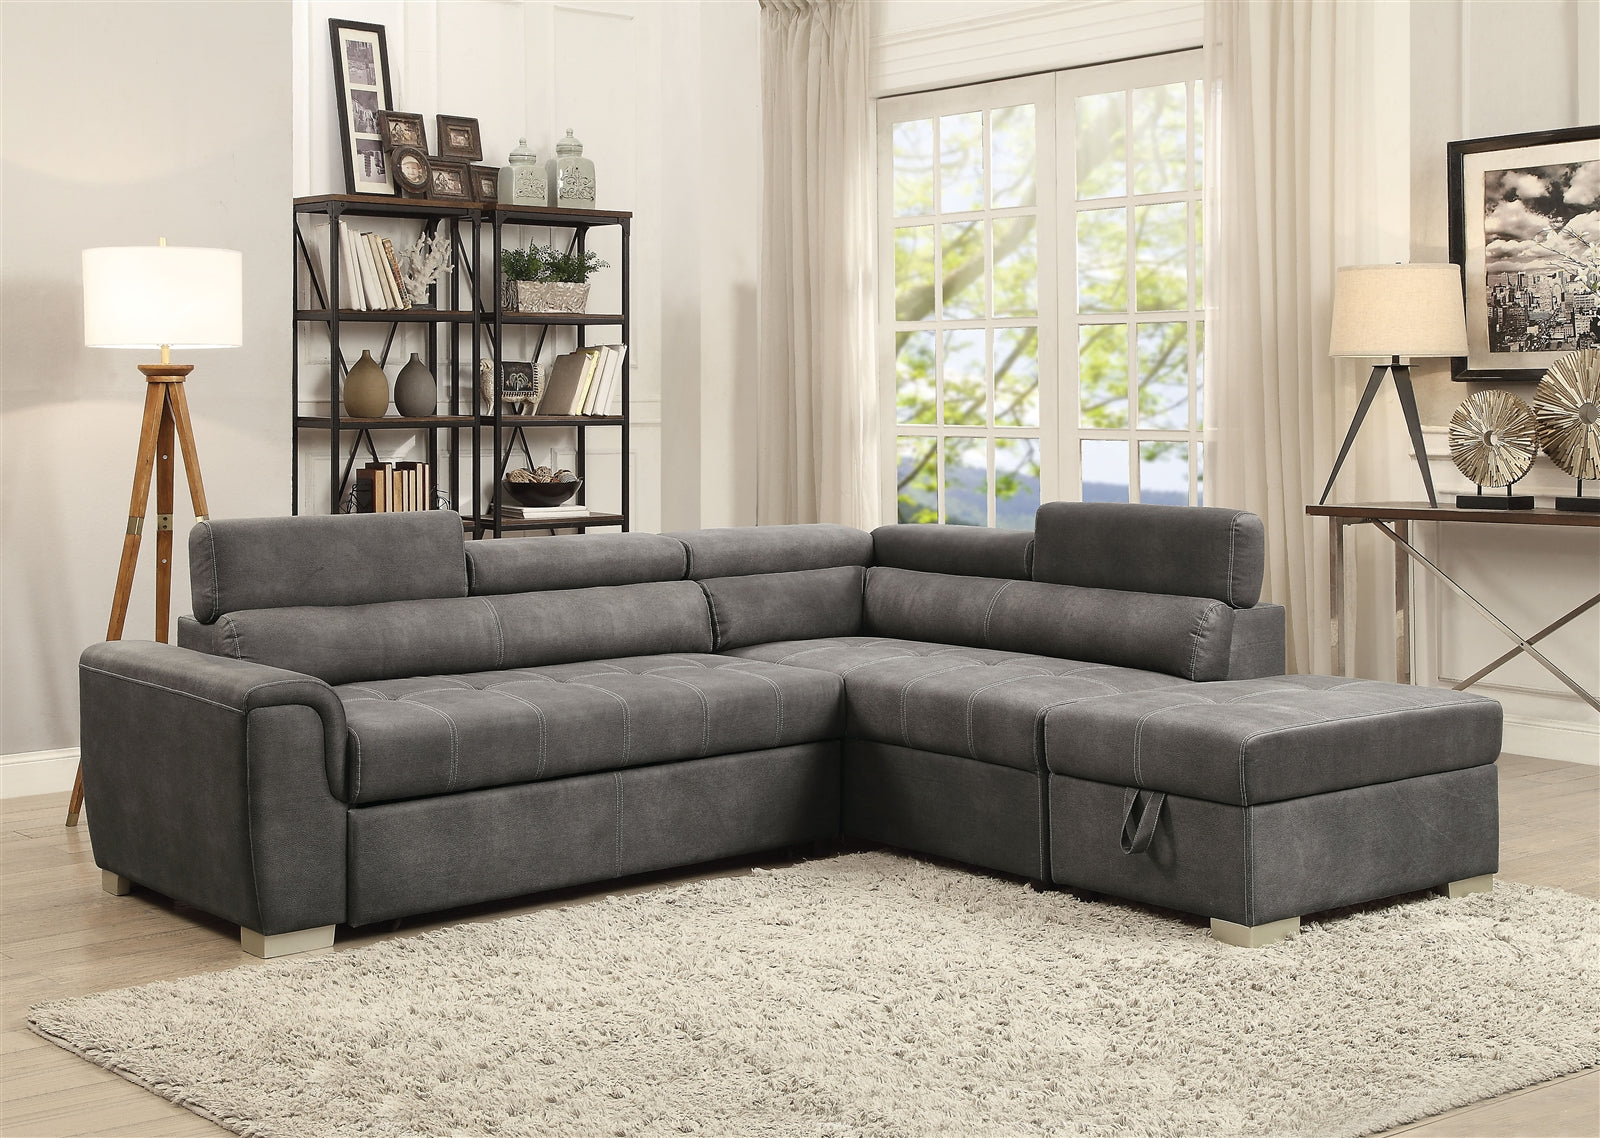 Thelma Modern Sleeper Sectional with Ottoman - ACME 50275